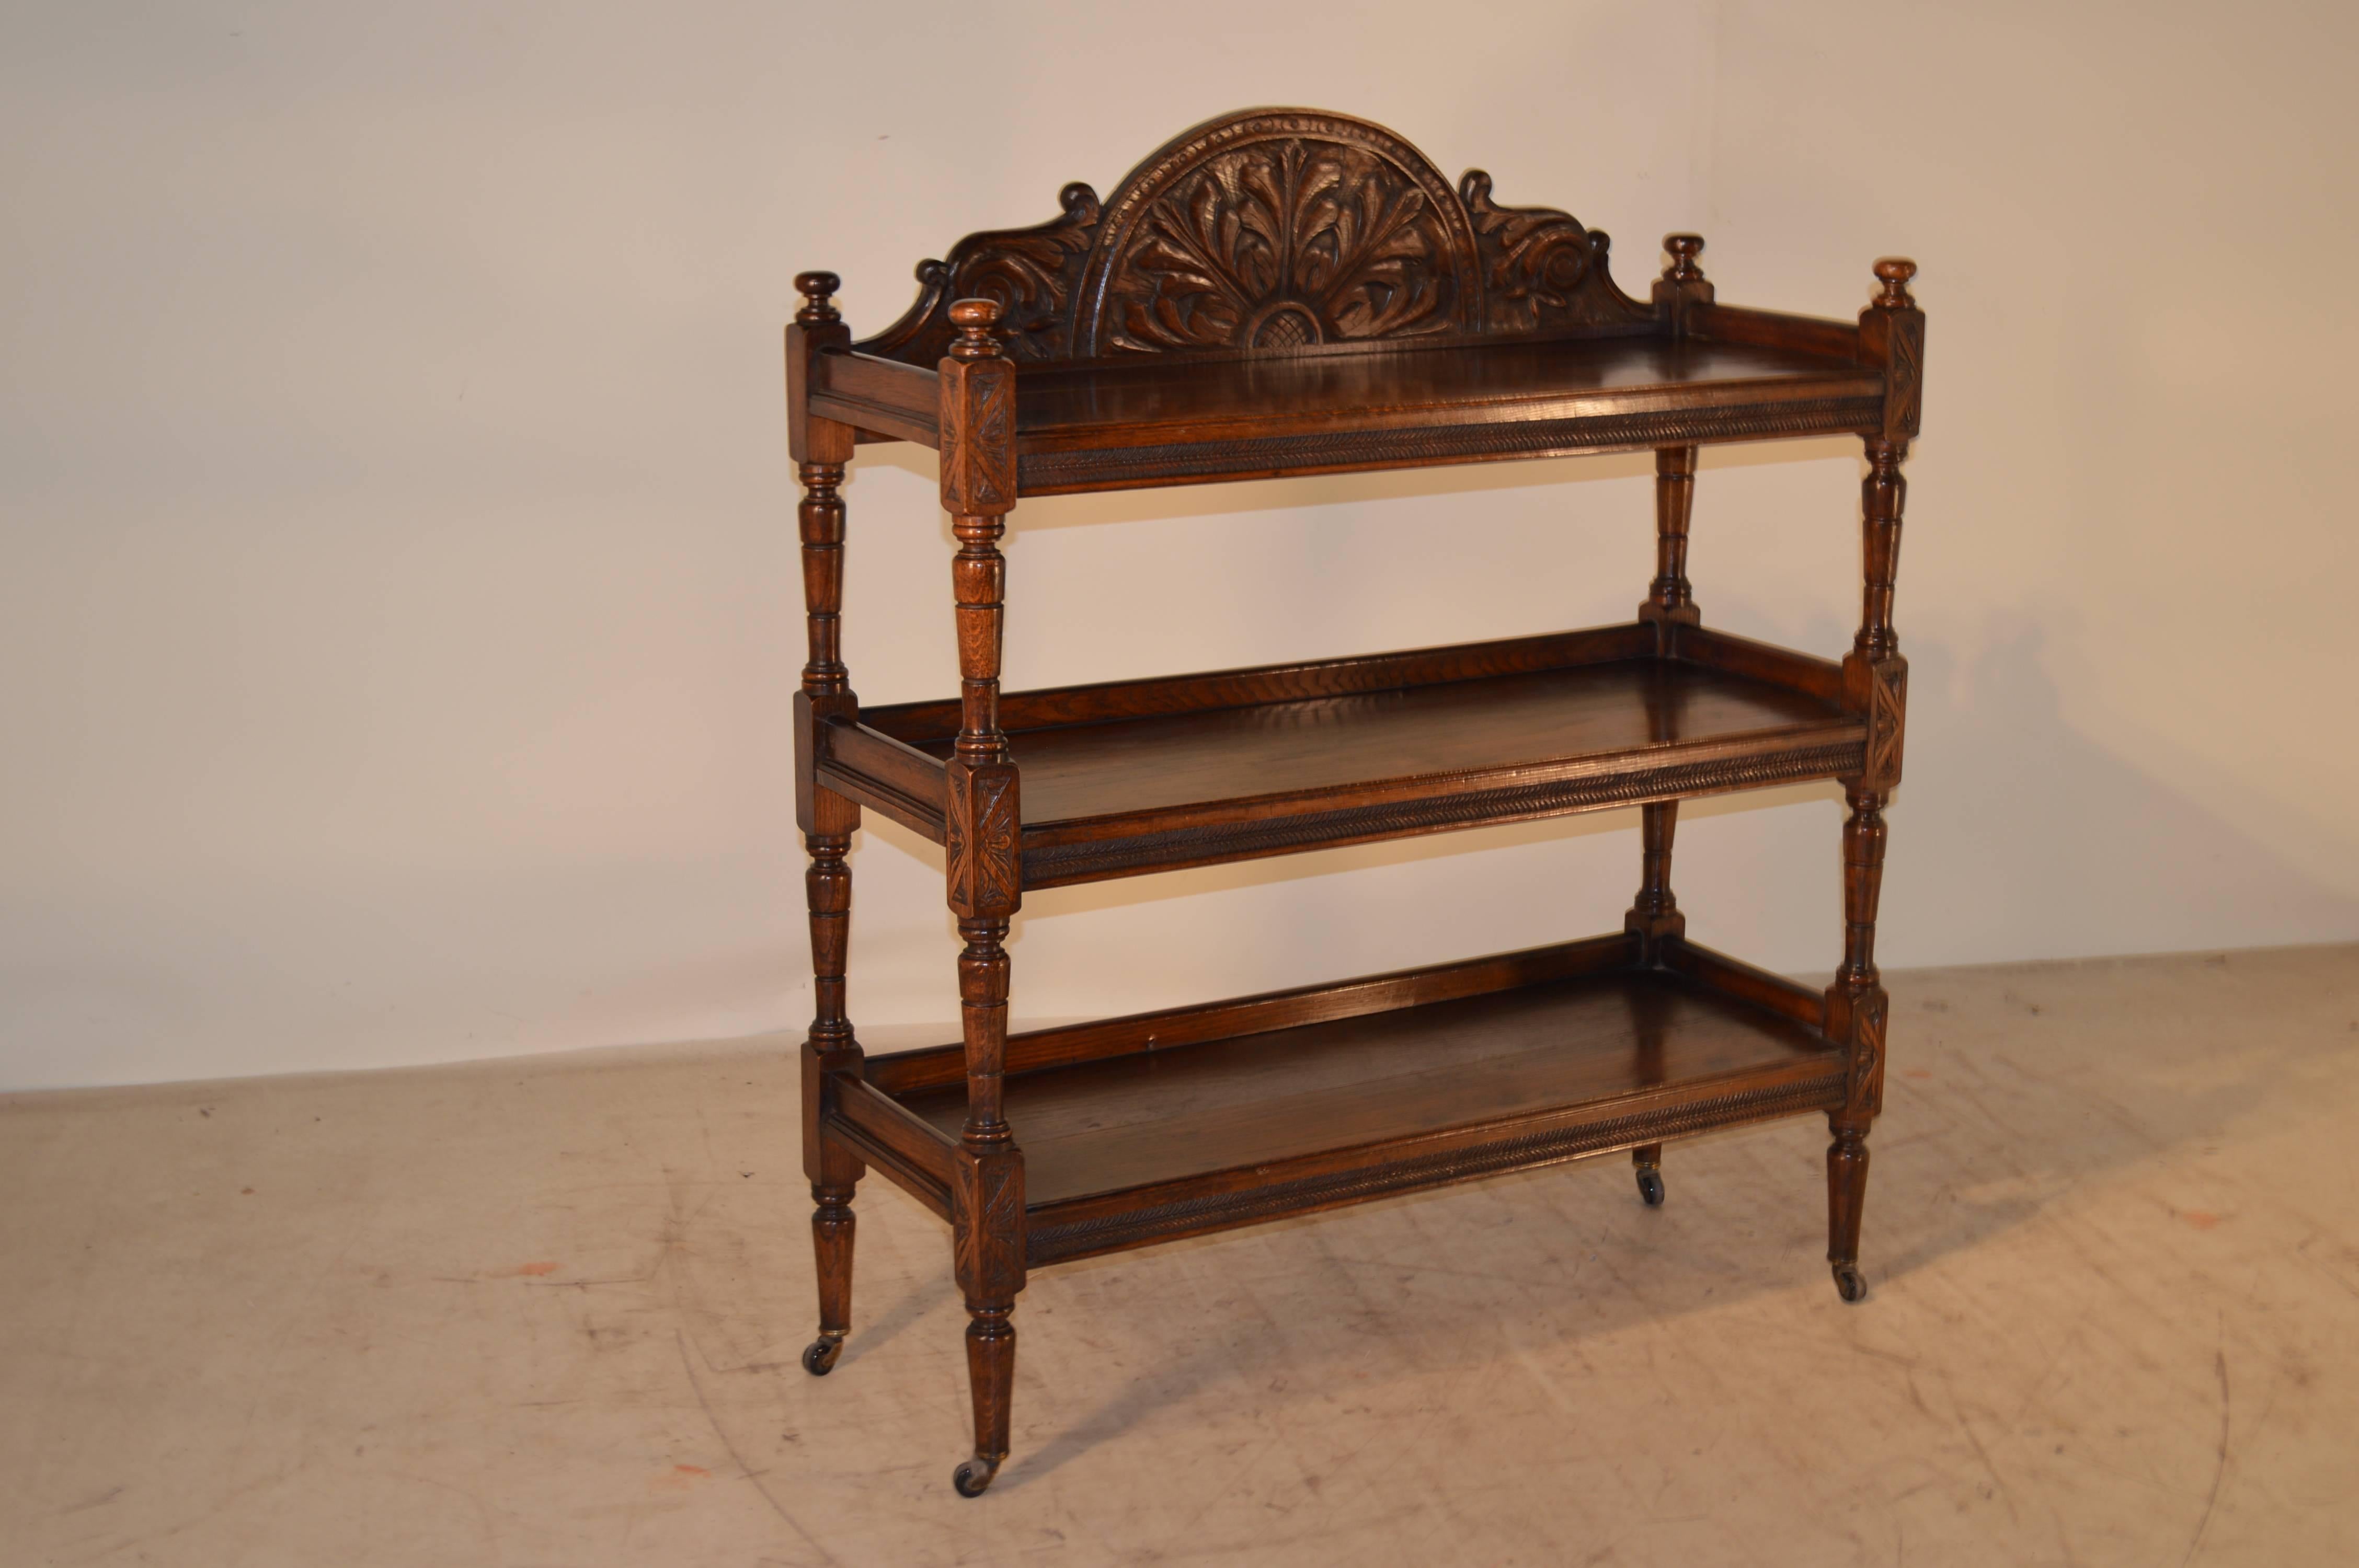 19th century French dumbwaiter made from oak with lovely carved backsplash and three shelves with carved decoration on fronts of shelves. Nicely turned shelf supports and legs supported on casters.